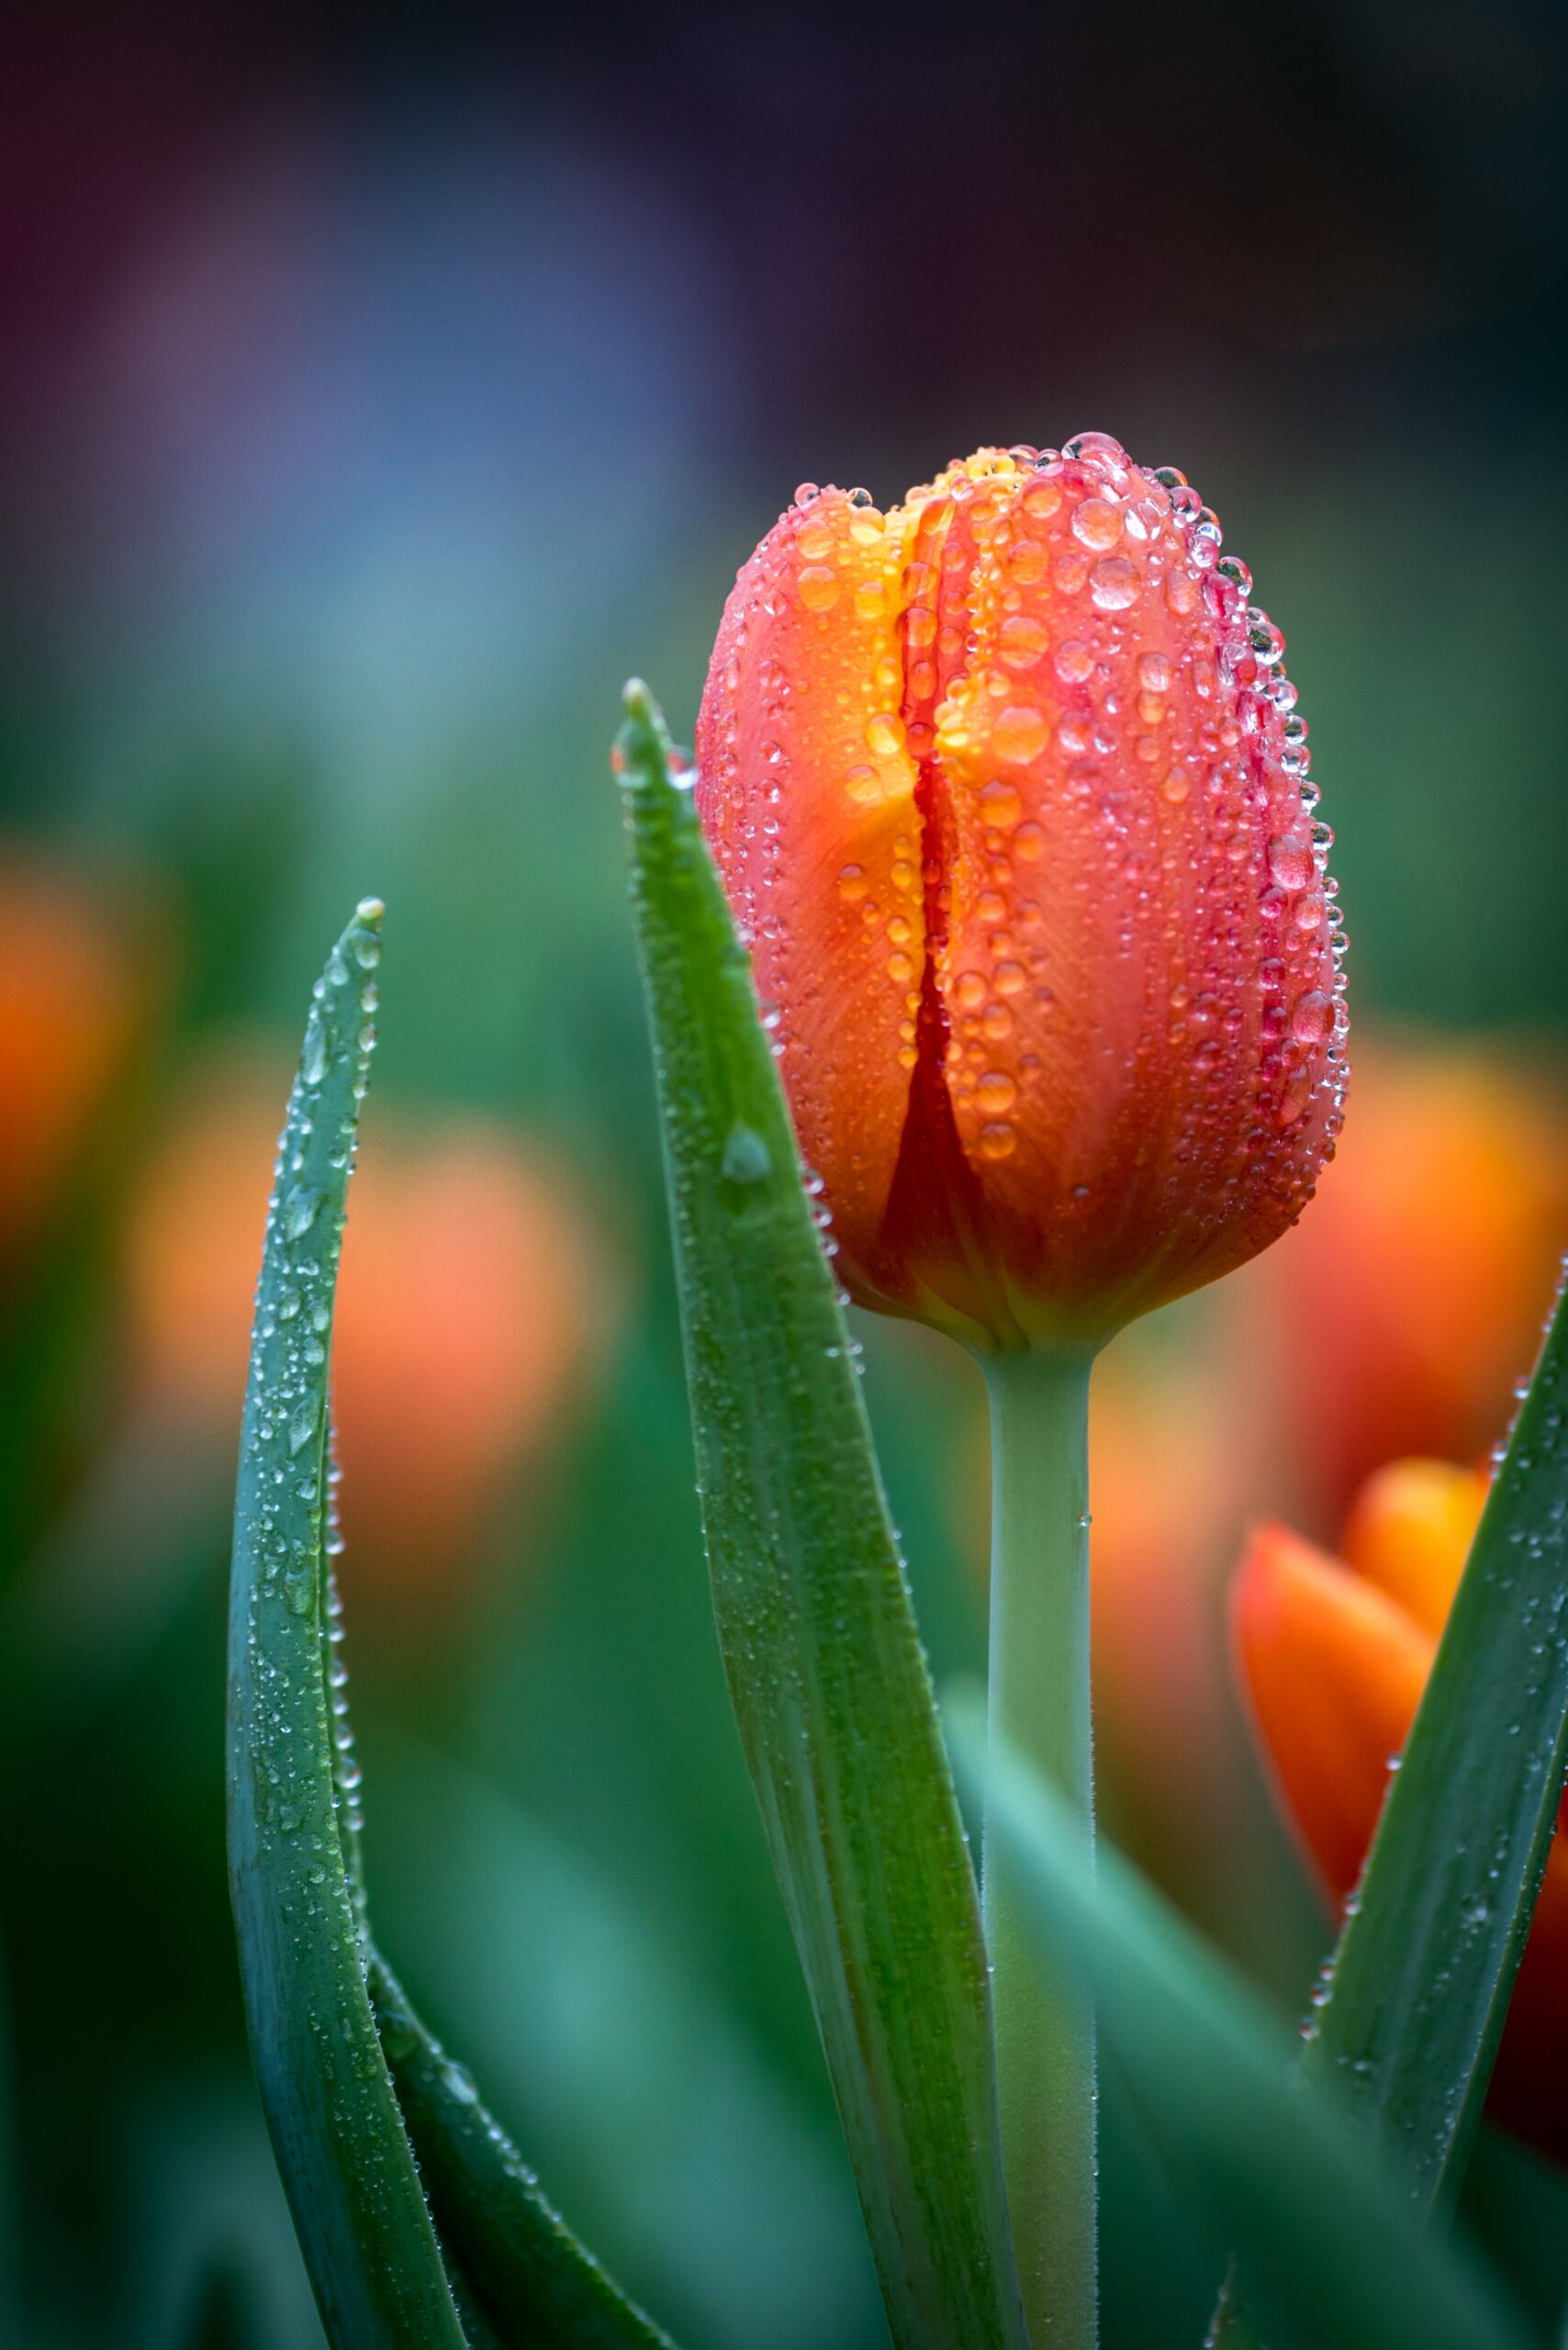 A photograph of tulips with morning dew.